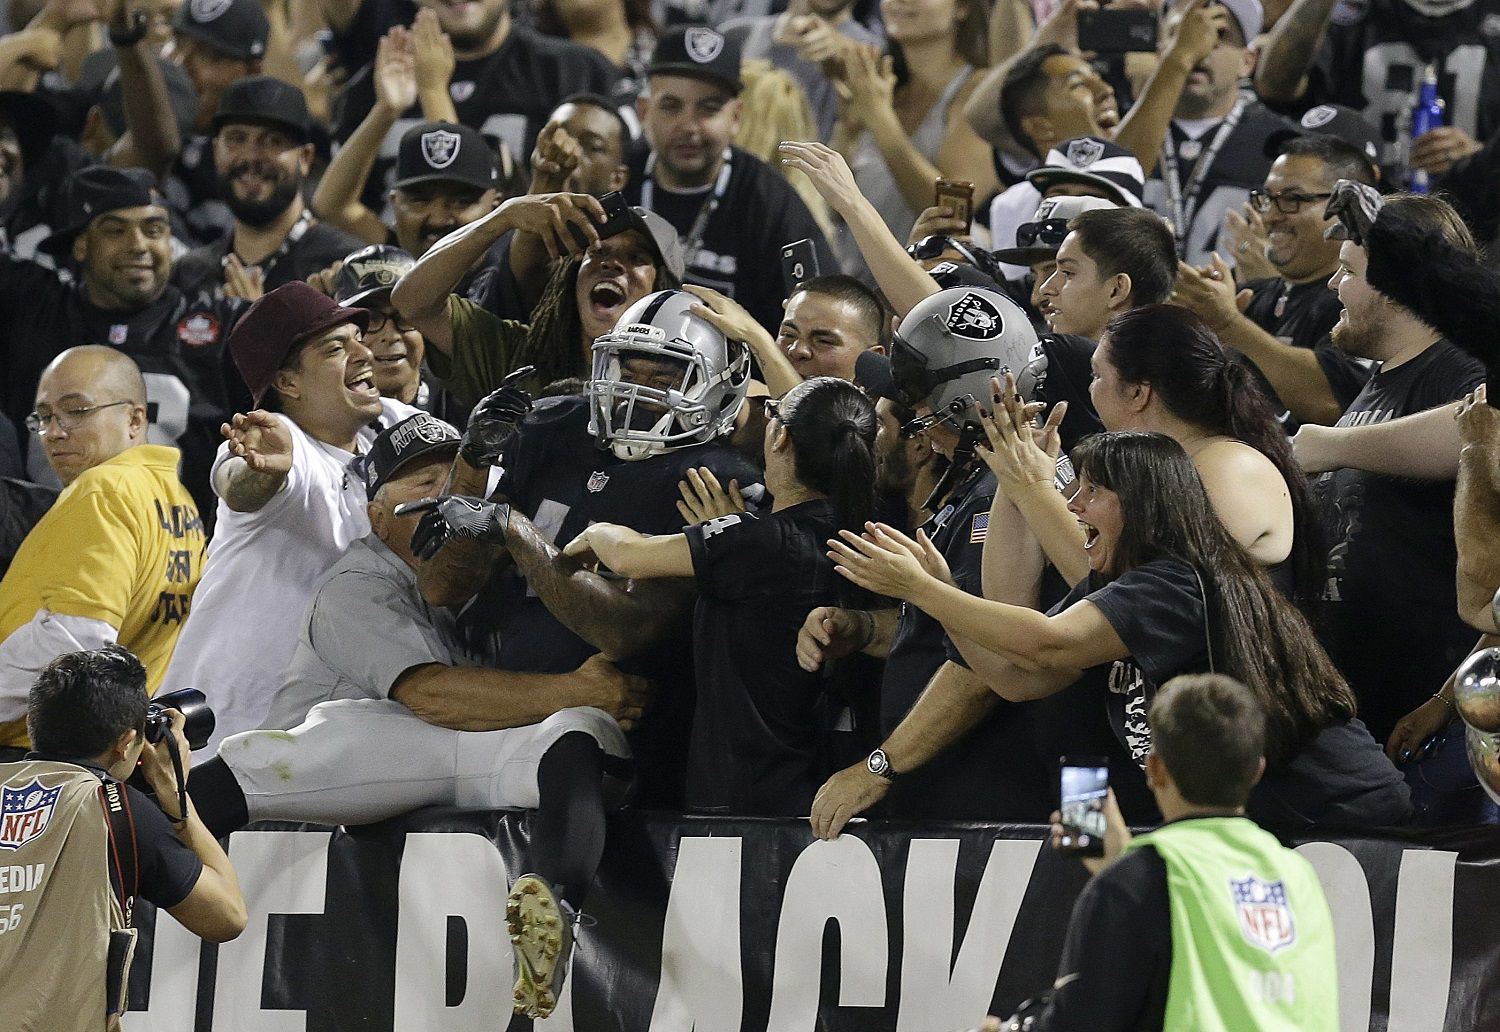 Oakland Raiders running back George Atkinson III (45) celebrates with fans during the second half of an NFL preseason football game against the Seattle Seahawks in Oakland, Calif., Thursday, Aug. 31, 2017. Atkinson had scored an apparent touchdown that called back on penalty. (AP Photo/Ben Margot)